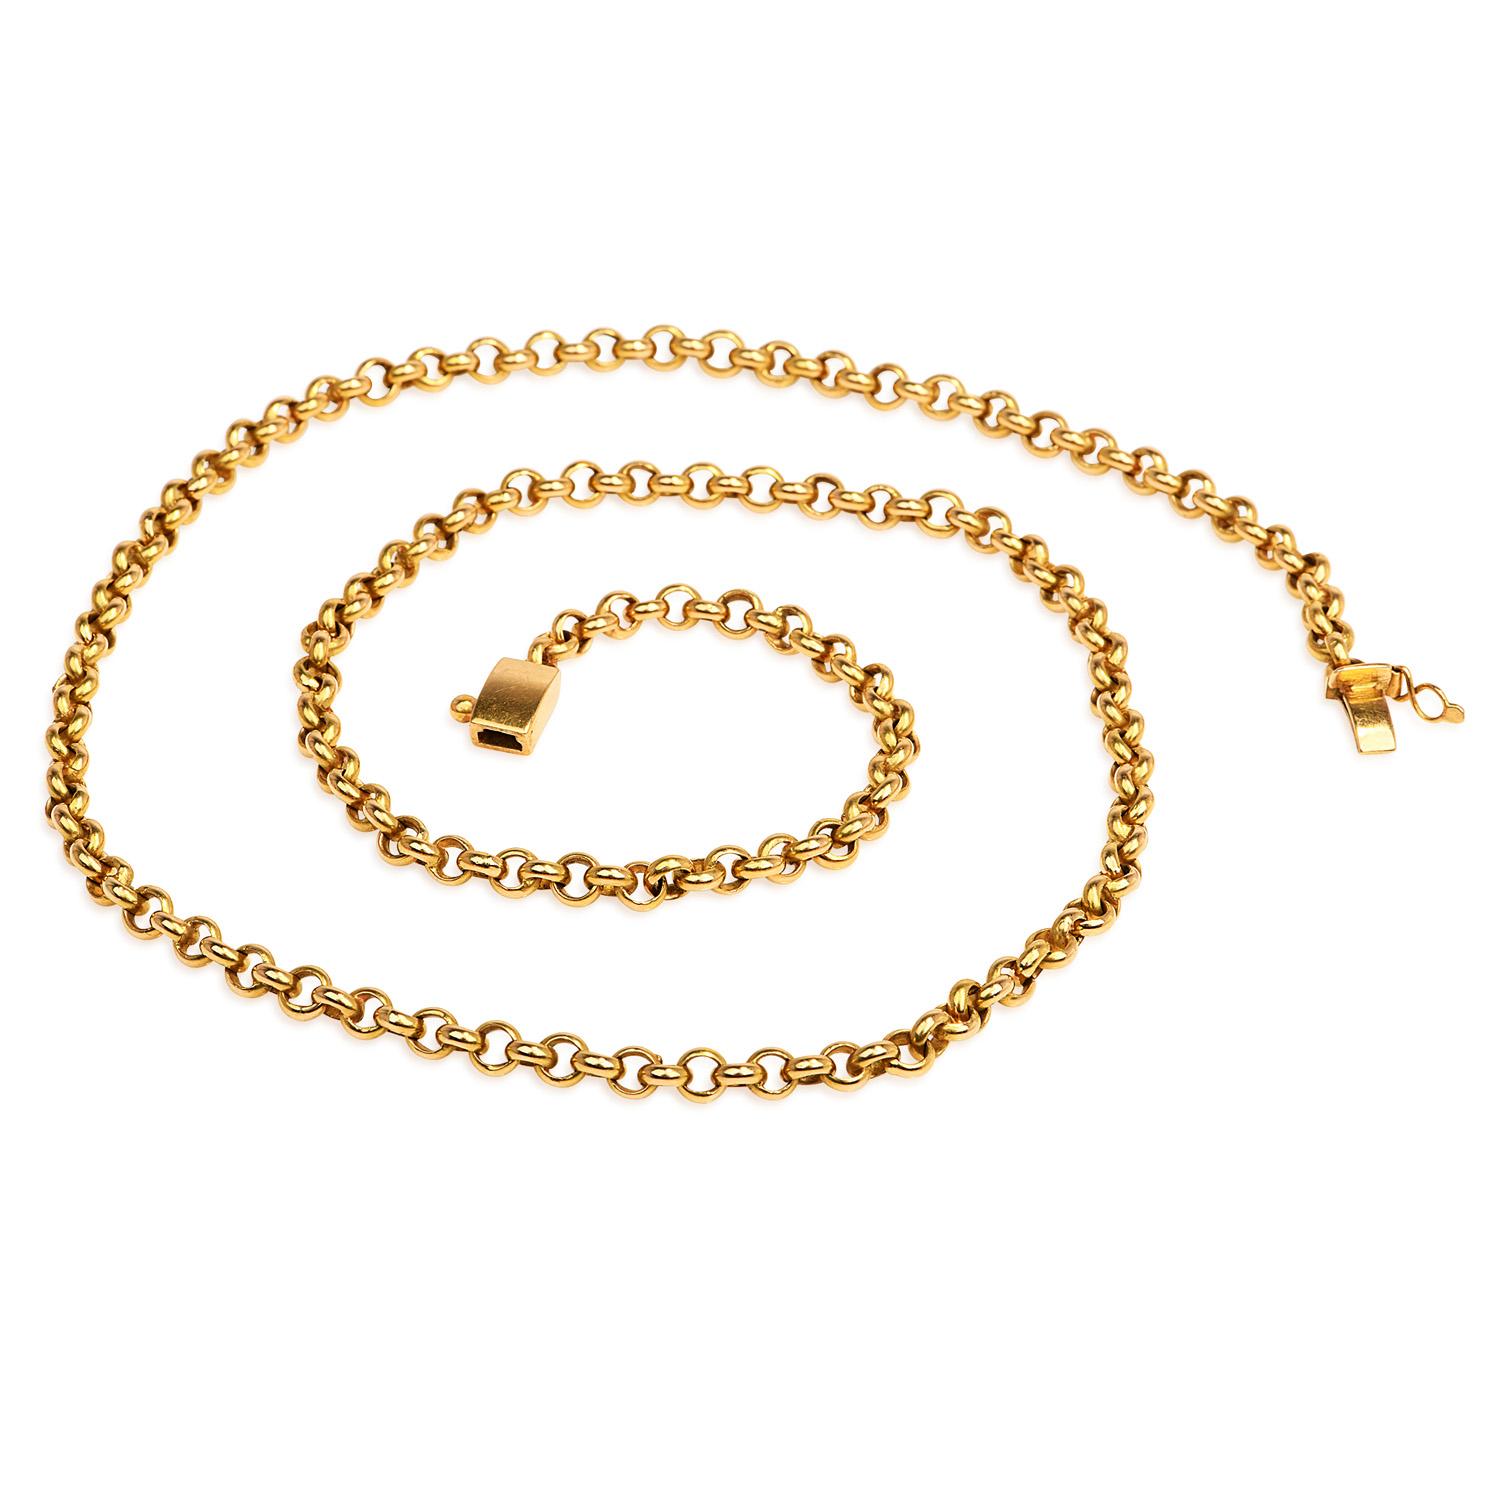 Vintage 1950's Round link chain necklace, for versatile unisex wear,

Crafted in solid 18K yellow gold, this elegant necklace weighs 42.3 grams and its total length is approximately 23.5